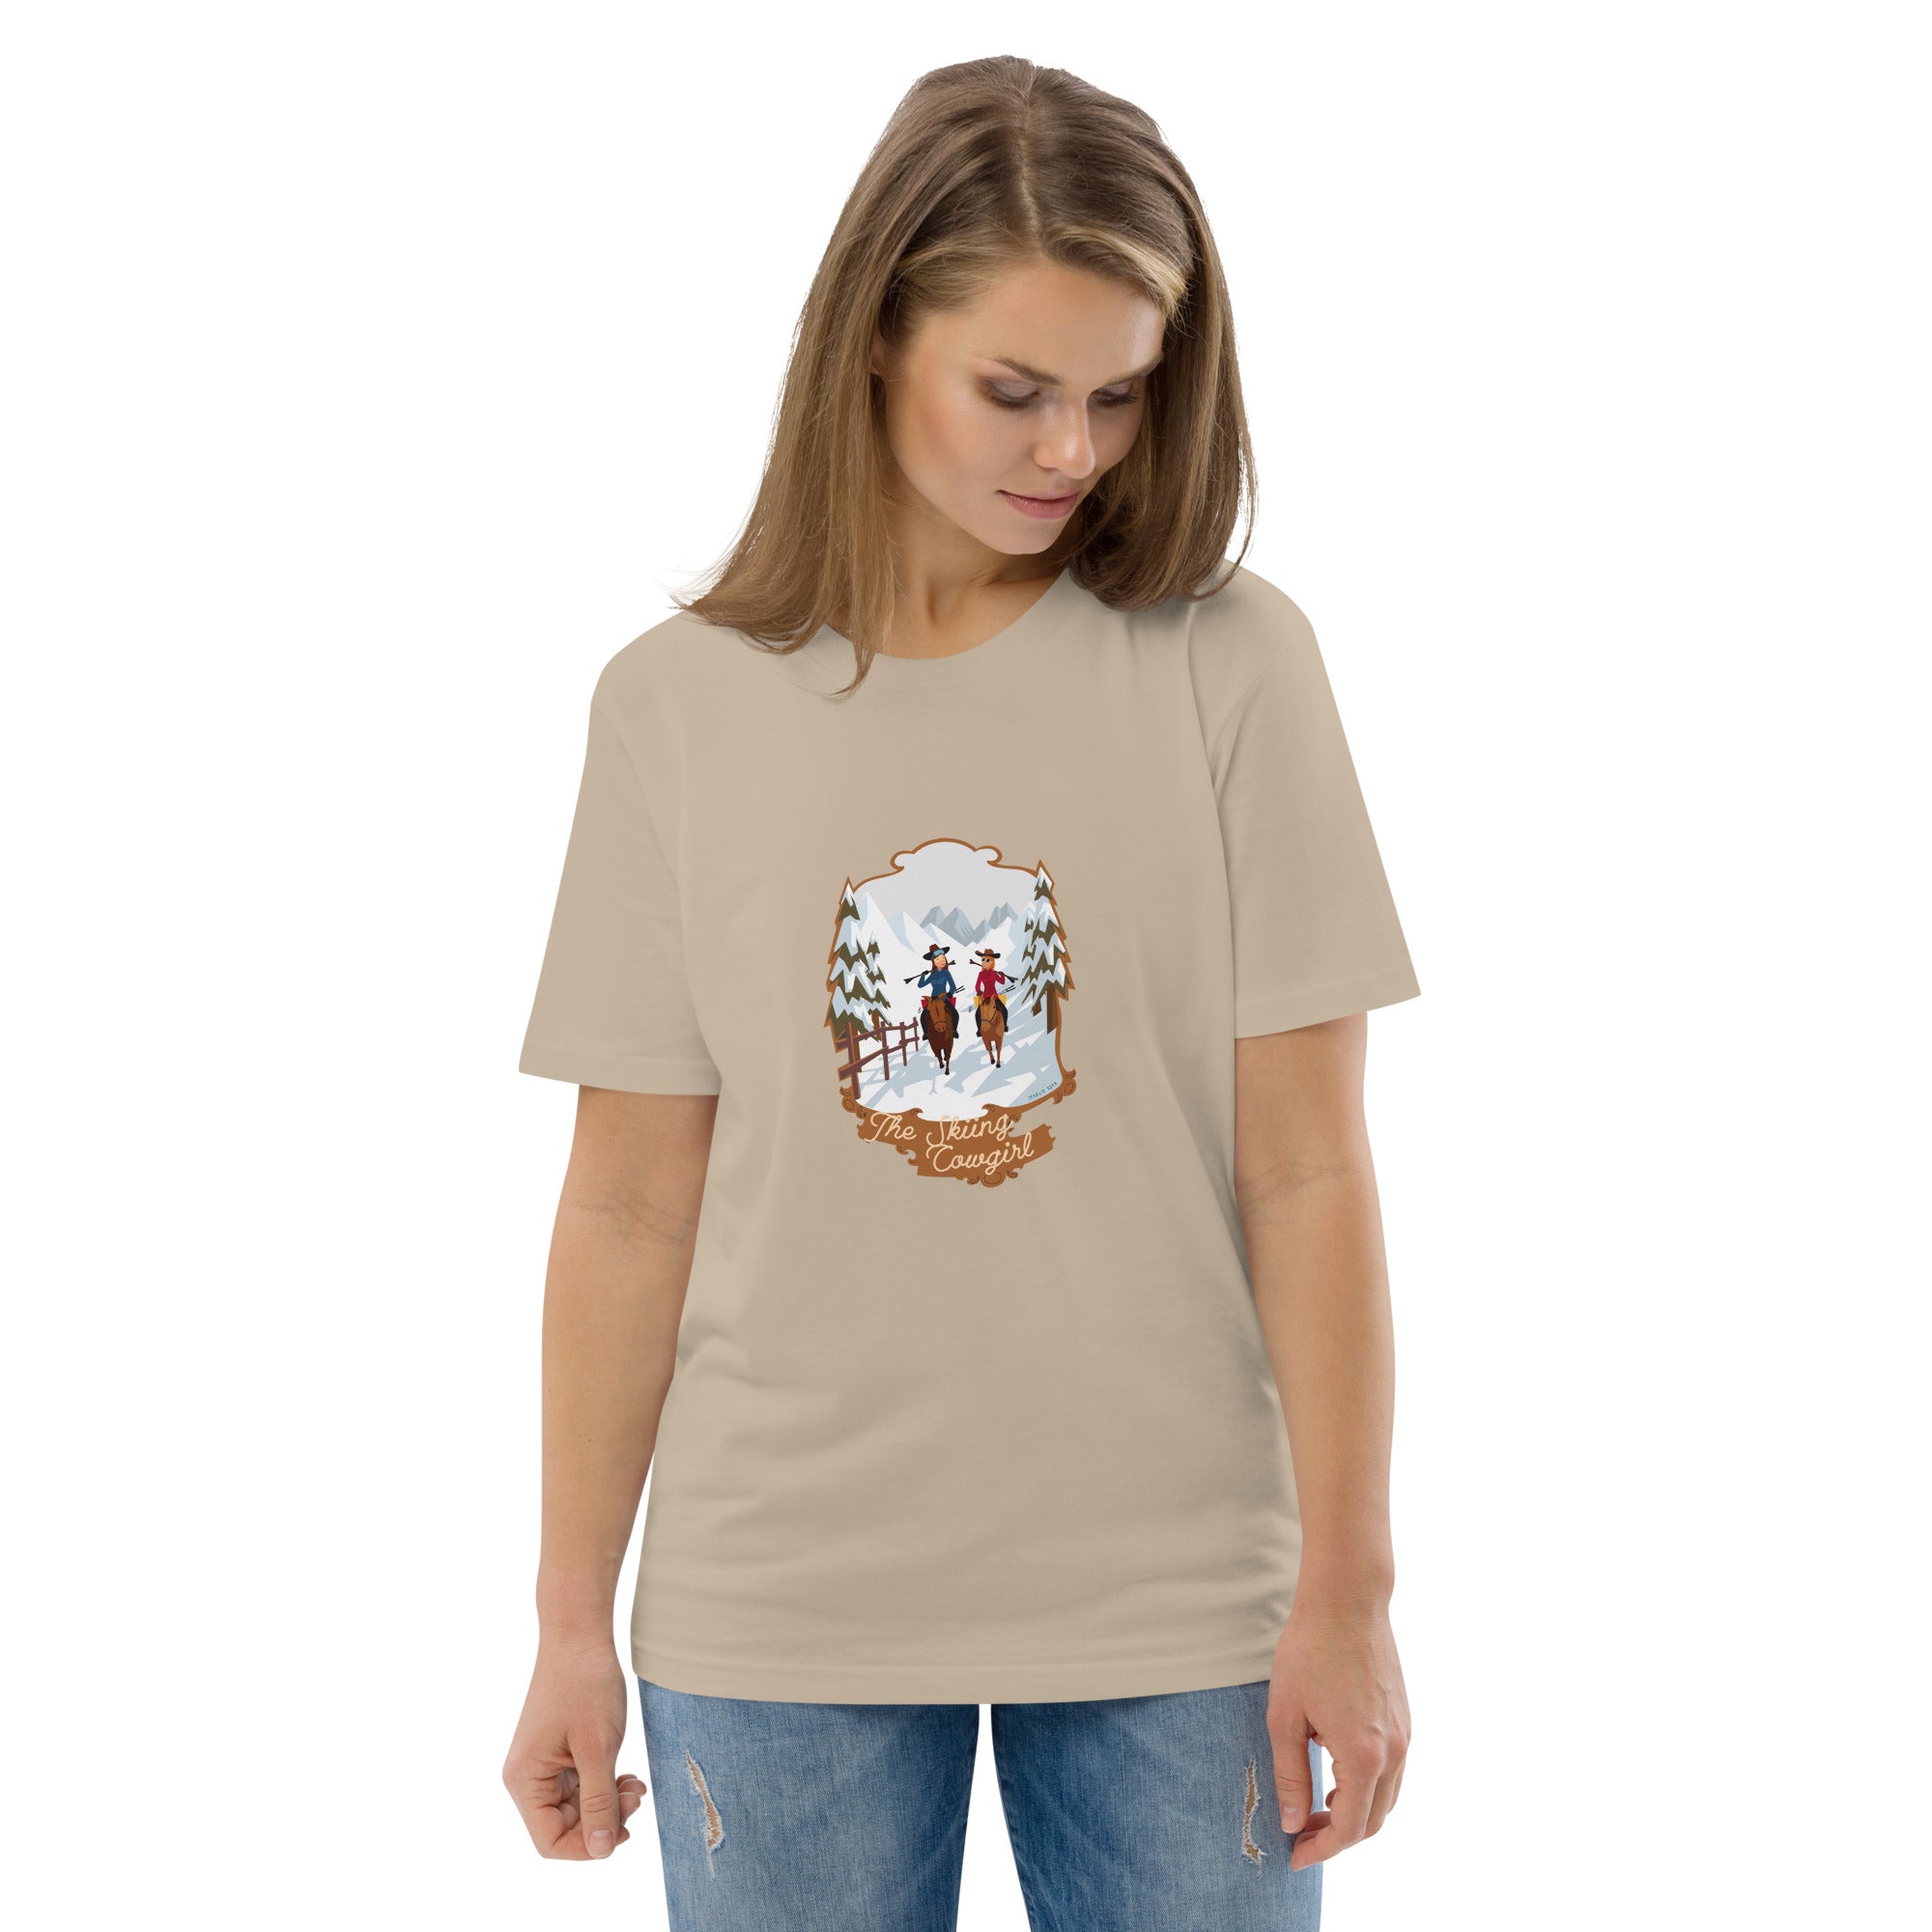 Unisex organic cotton t-shirt The Skiing Cowgirl on light colors